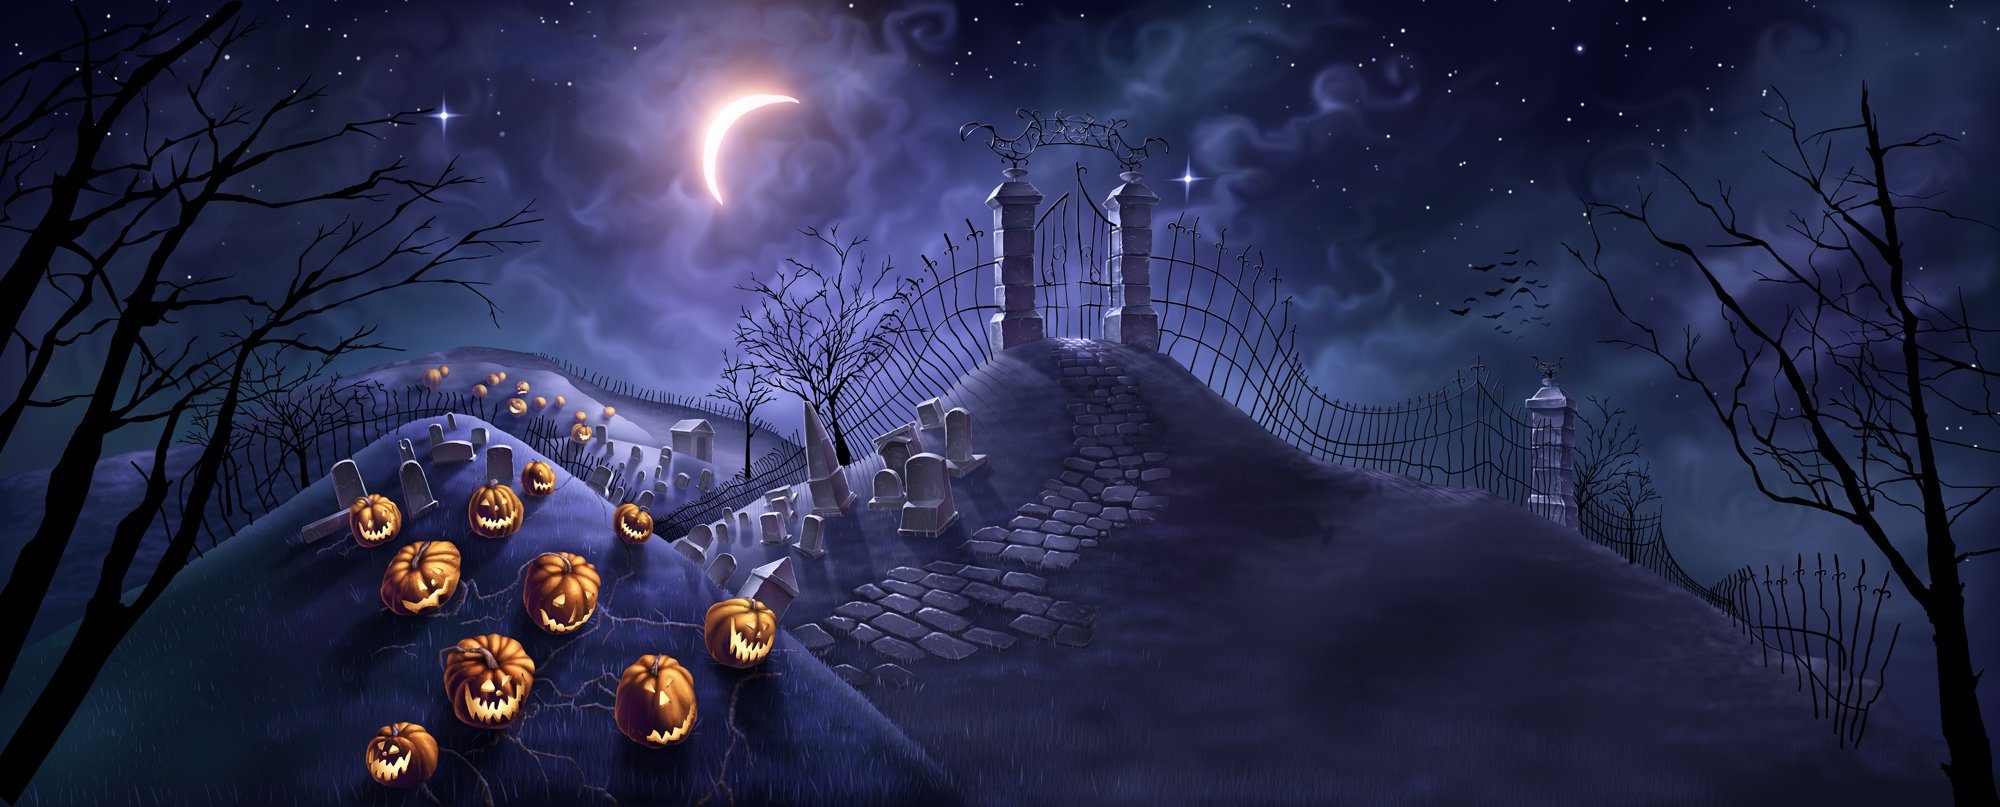 Free Halloween 2013 Backgrounds Wallpapers 2000x807